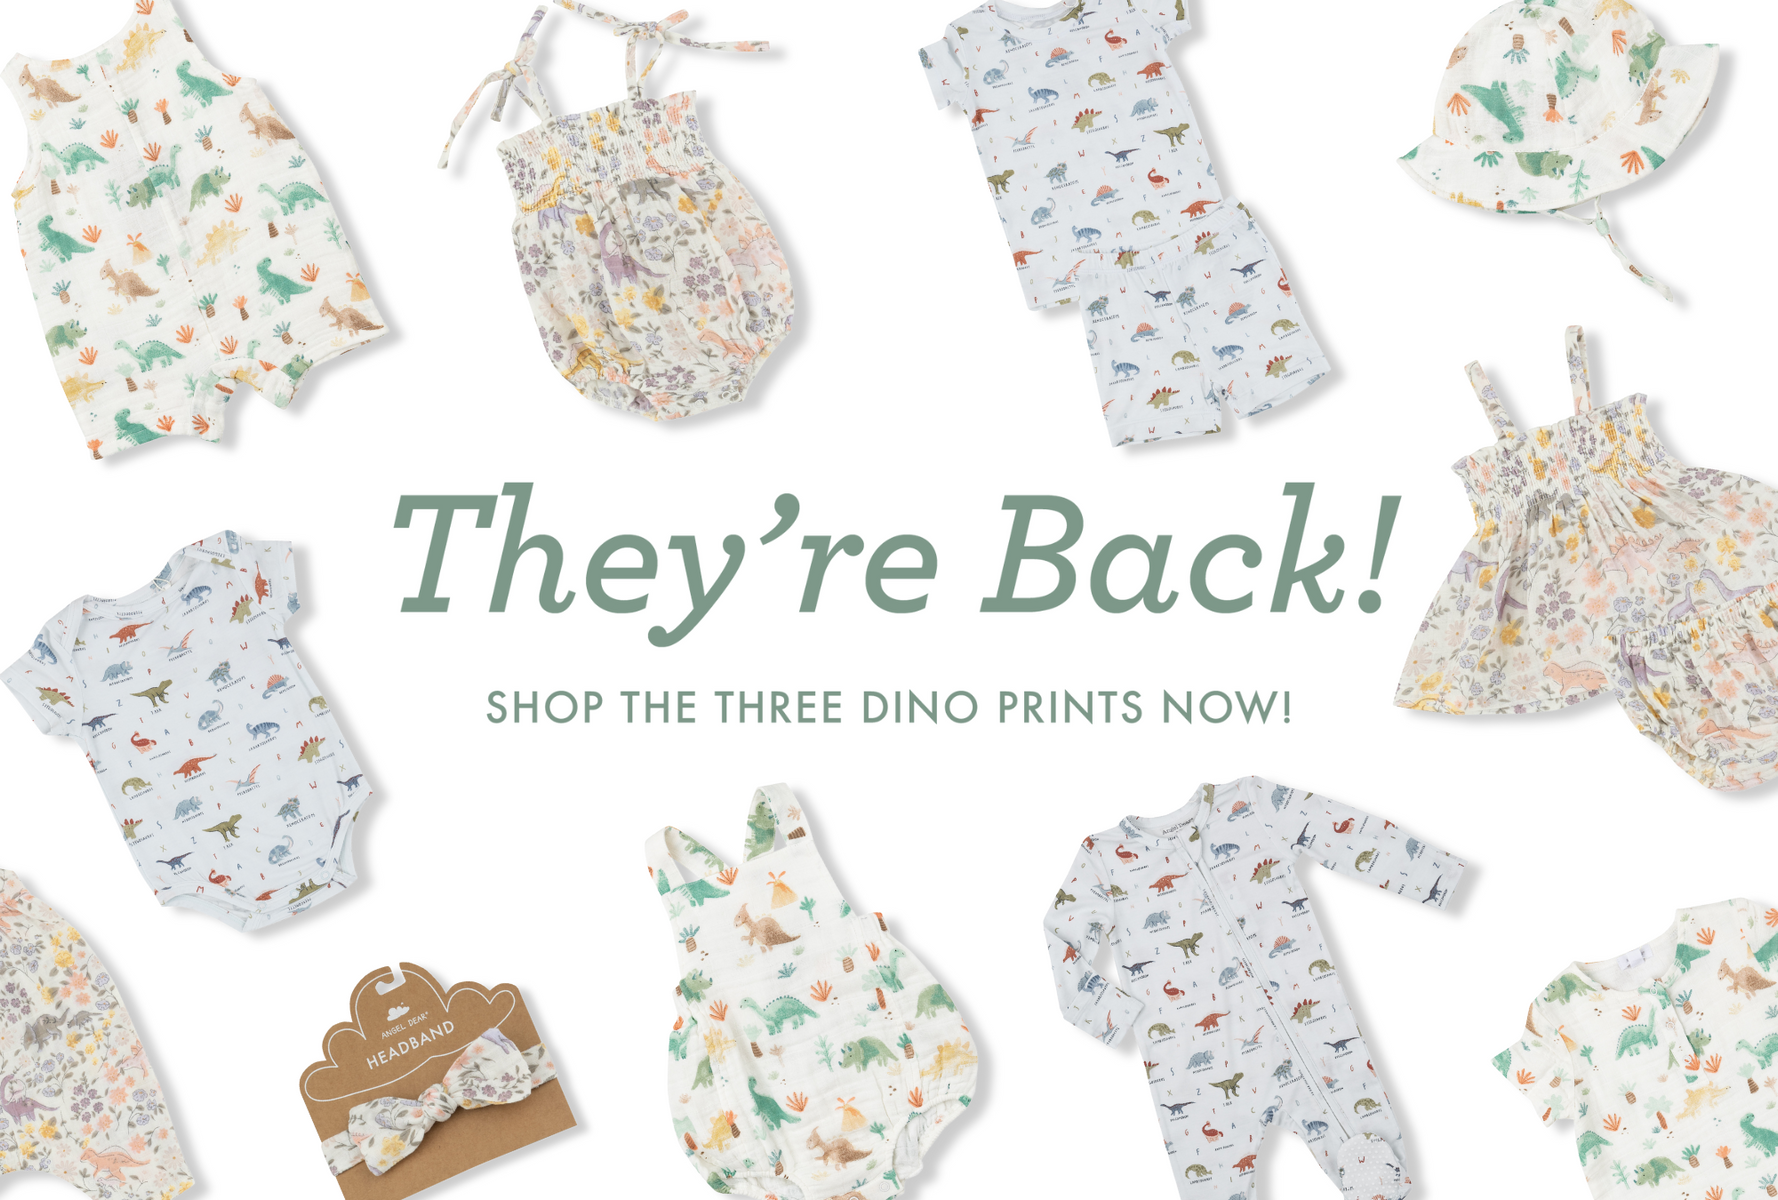 collage of dinosaur prints baby clothing - "They're Back!"